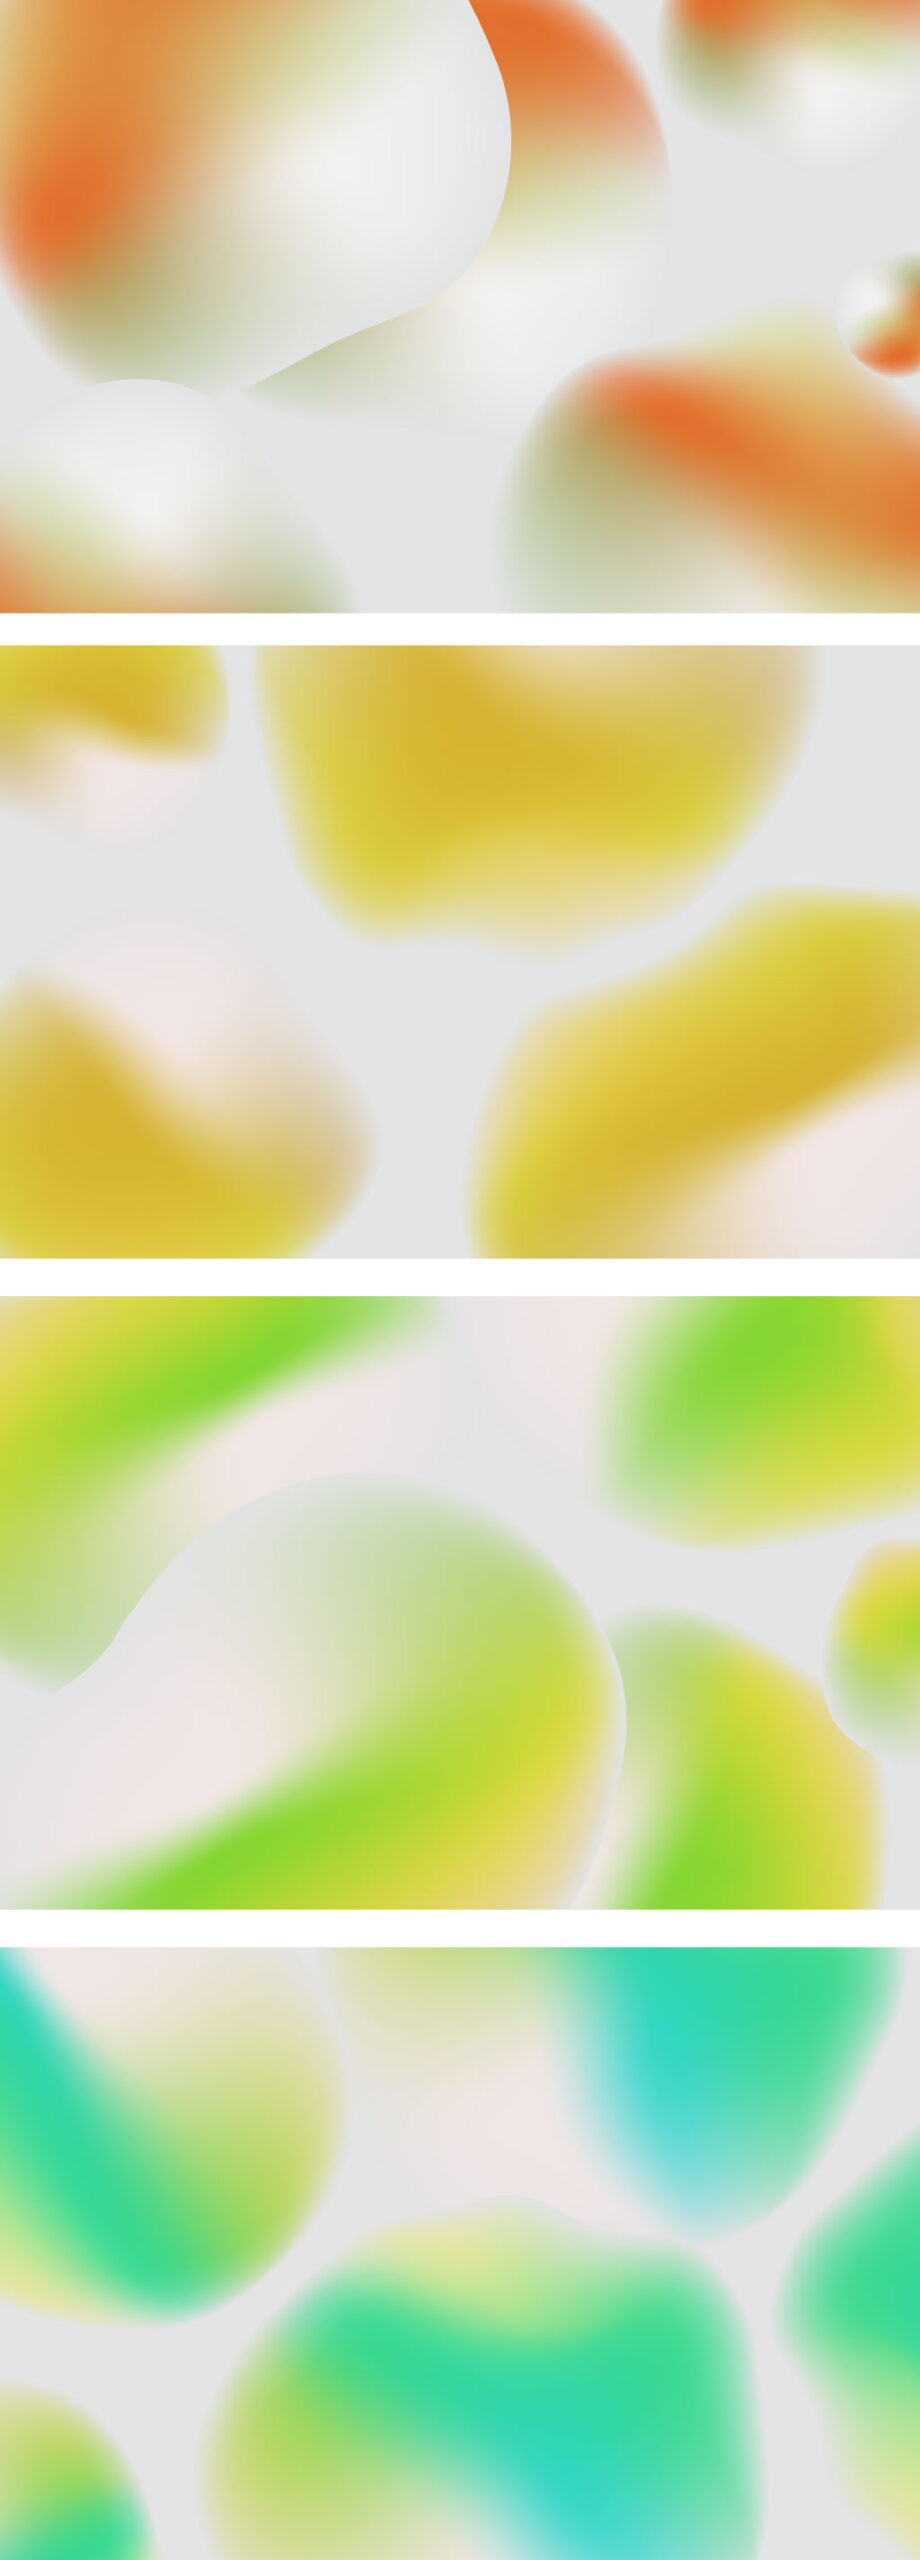 abstract vector blur background.